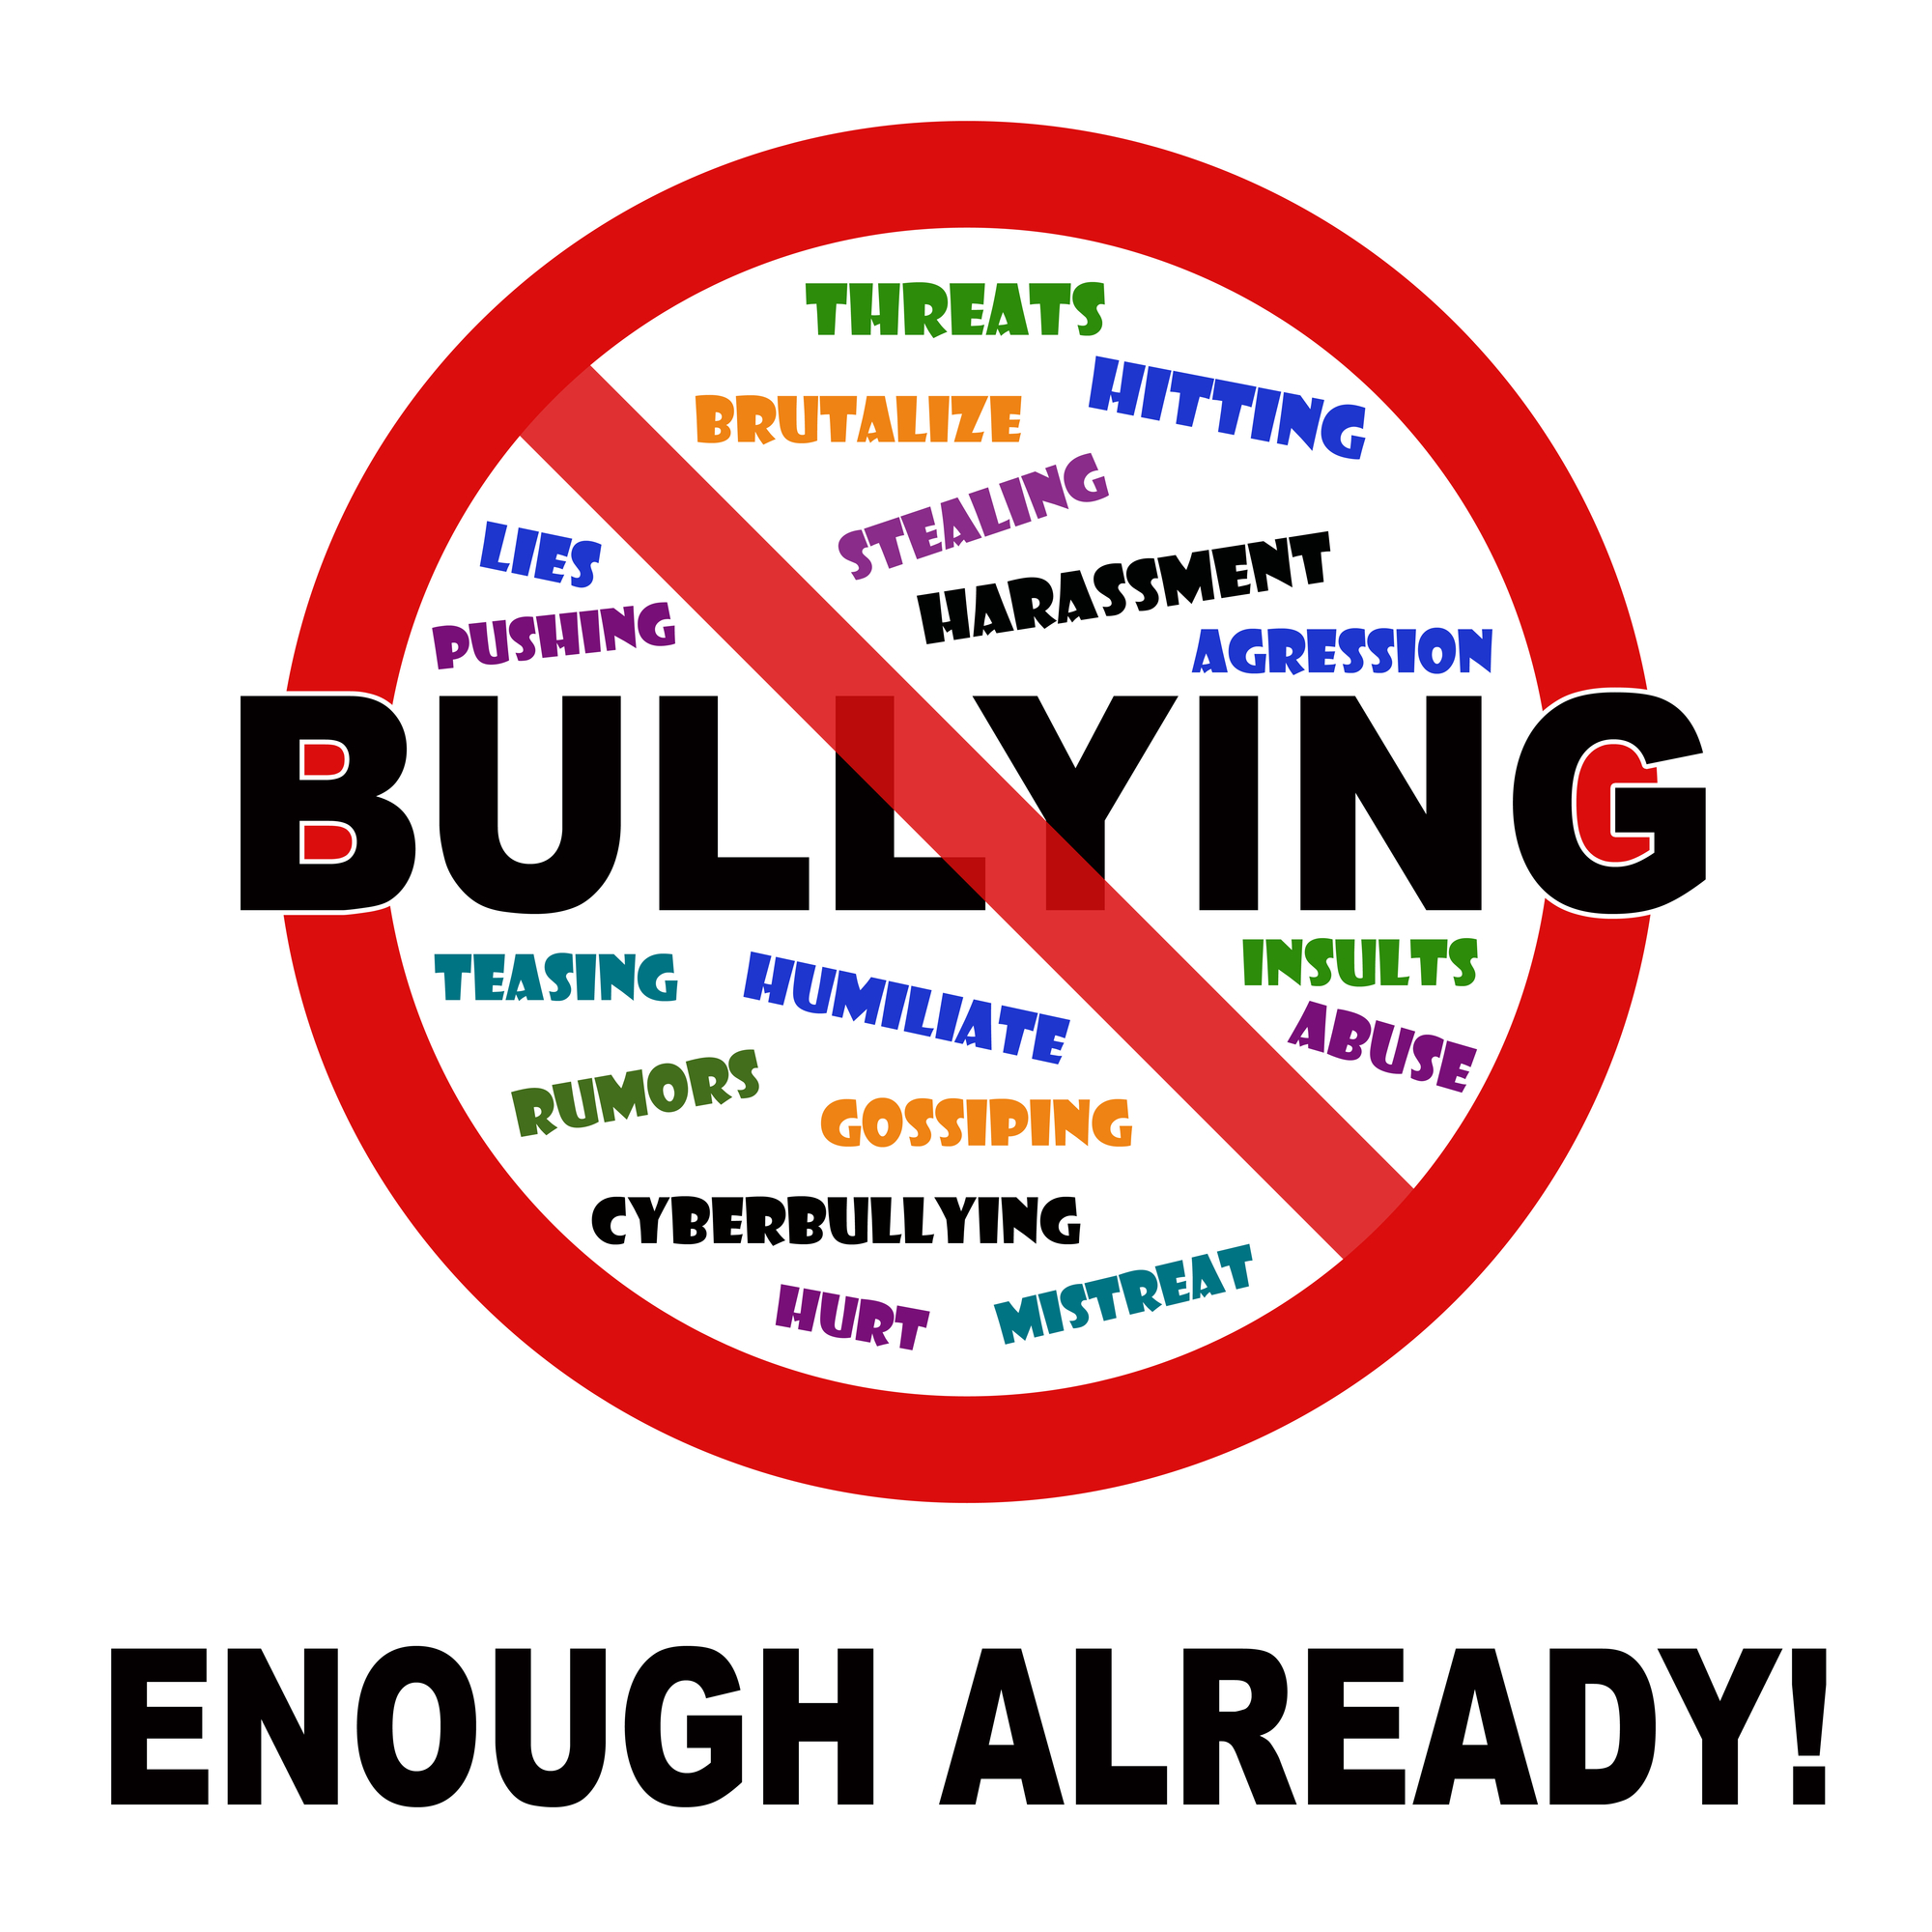 Parenting Advice: How to Fight The Battle Against Bullying